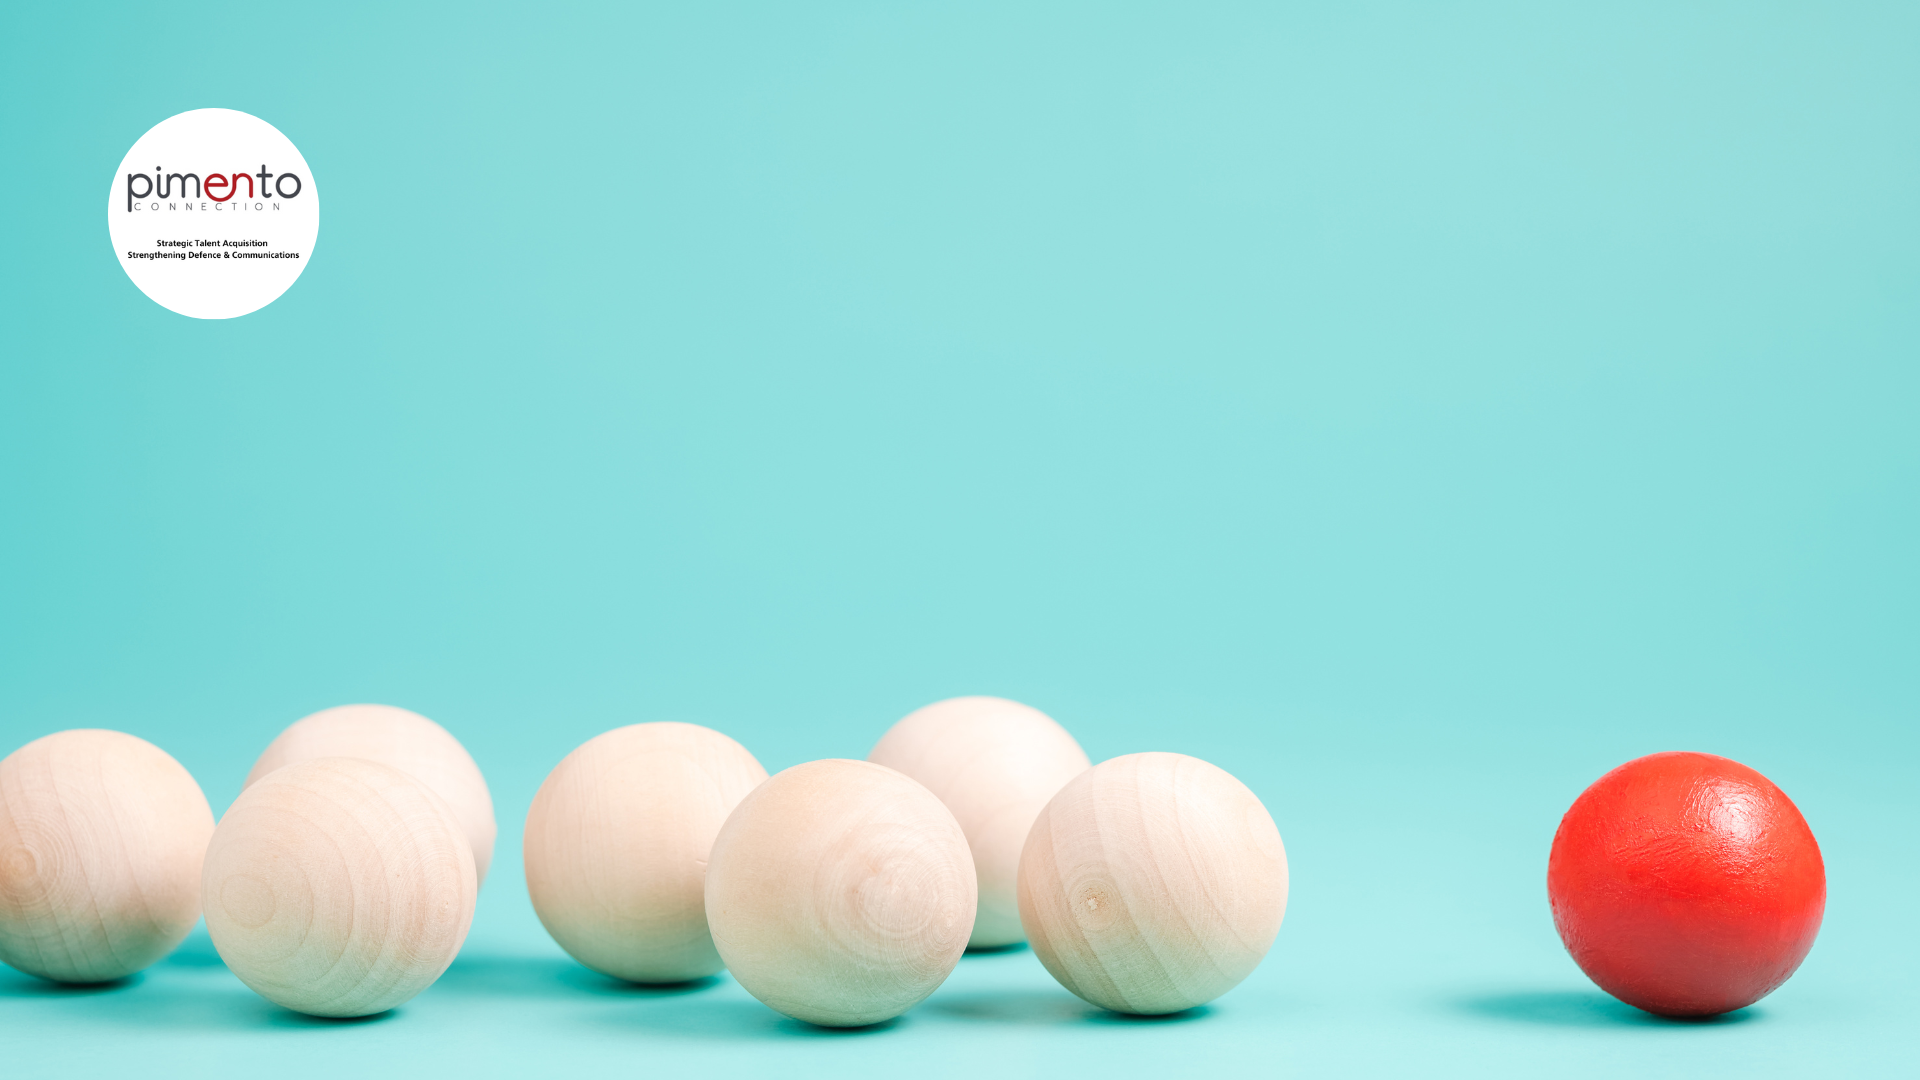 turquoise background, 7 wooden balls on the left, one red wooden ball on the right